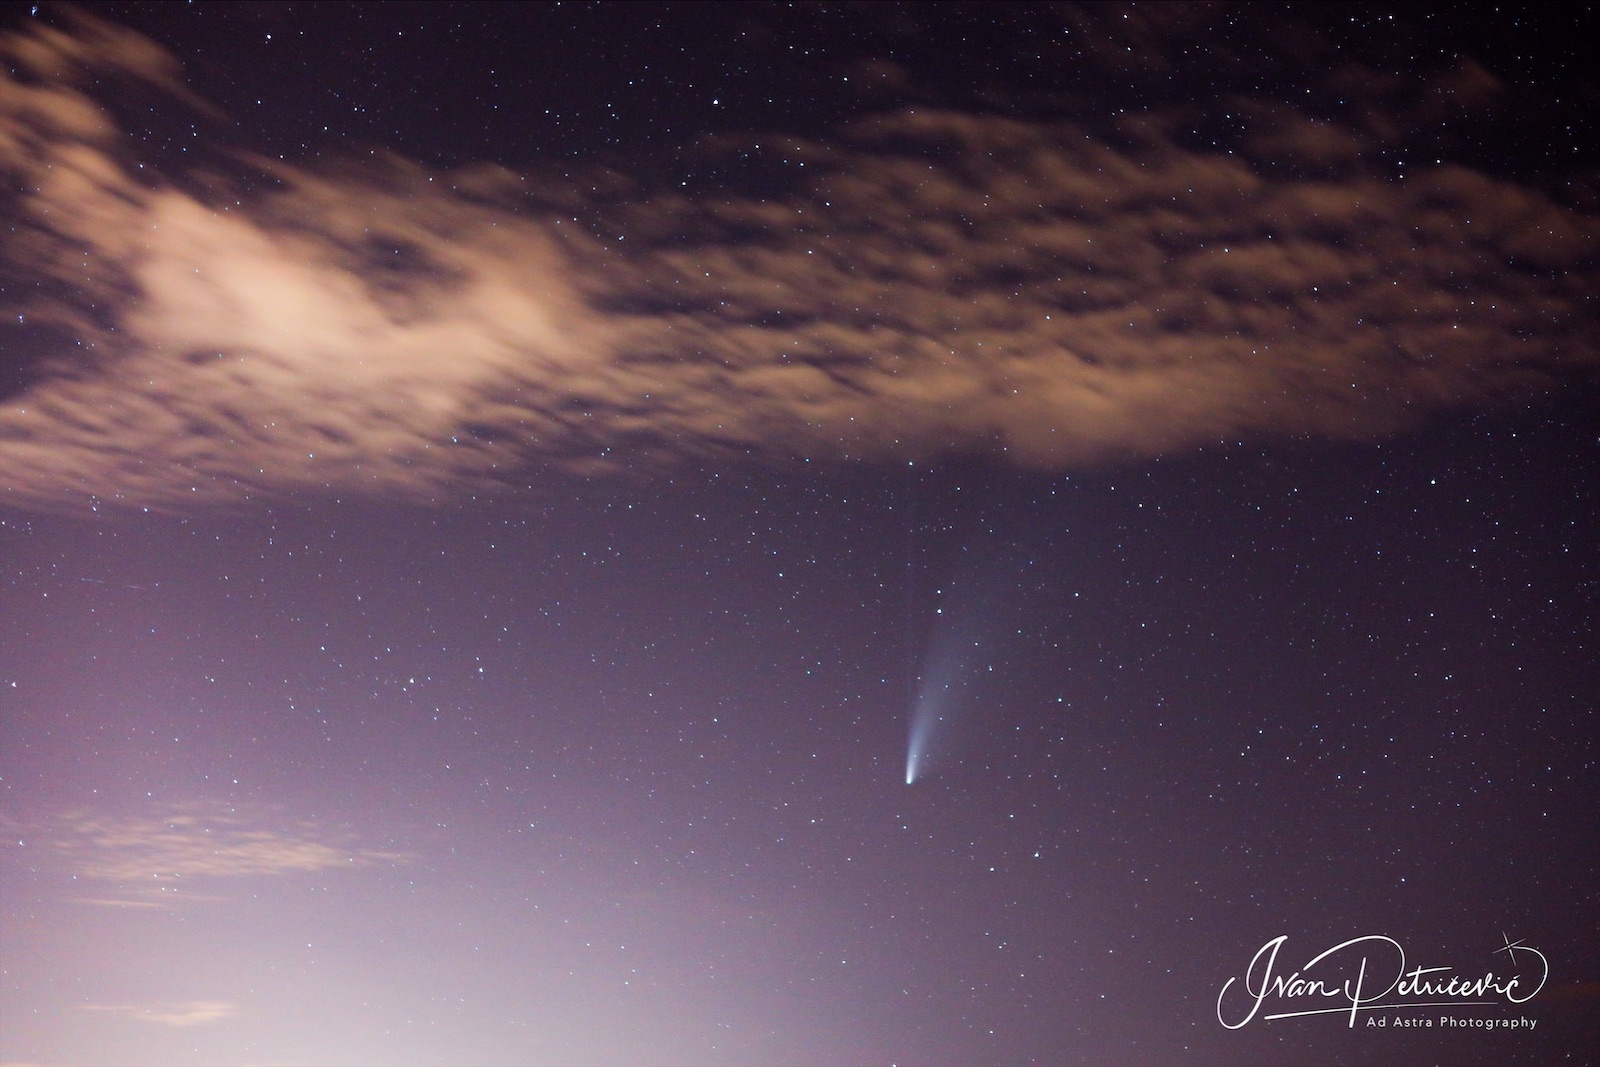 This is my photograph of comet NEOWISE.